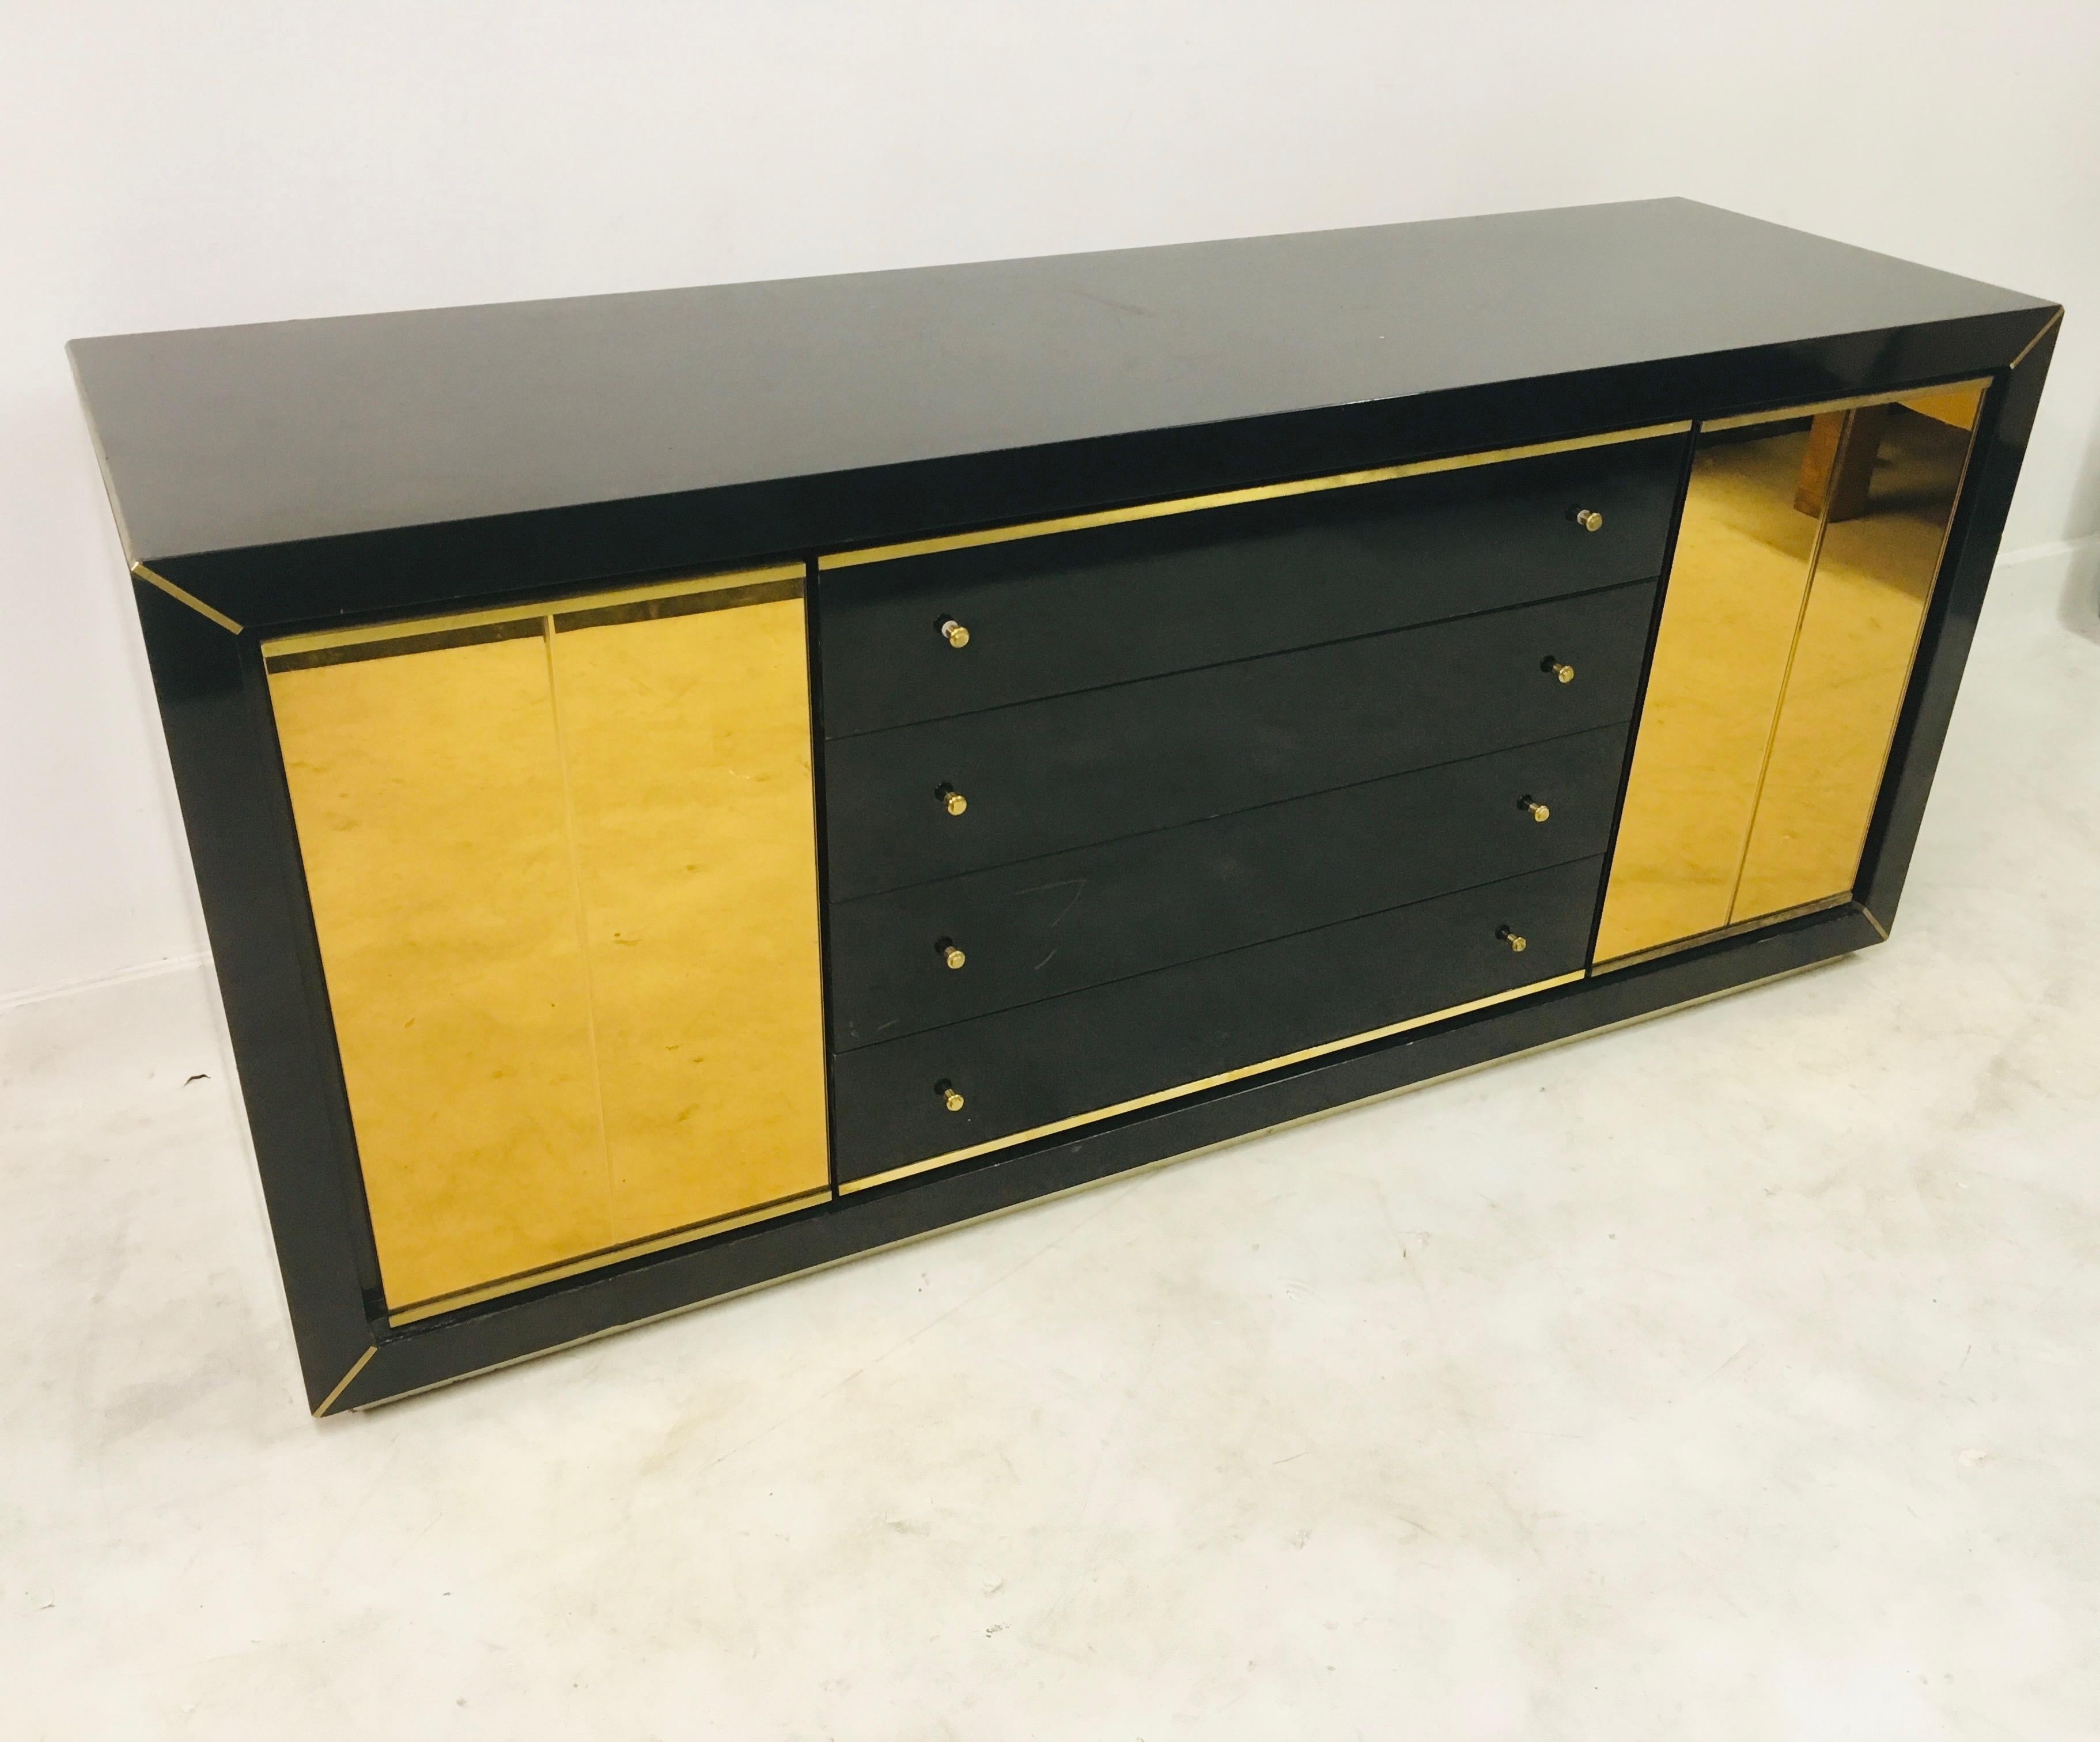 Vintage 1970s Italian Black Lacquer and Brass Sideboard (Hollywood Regency)